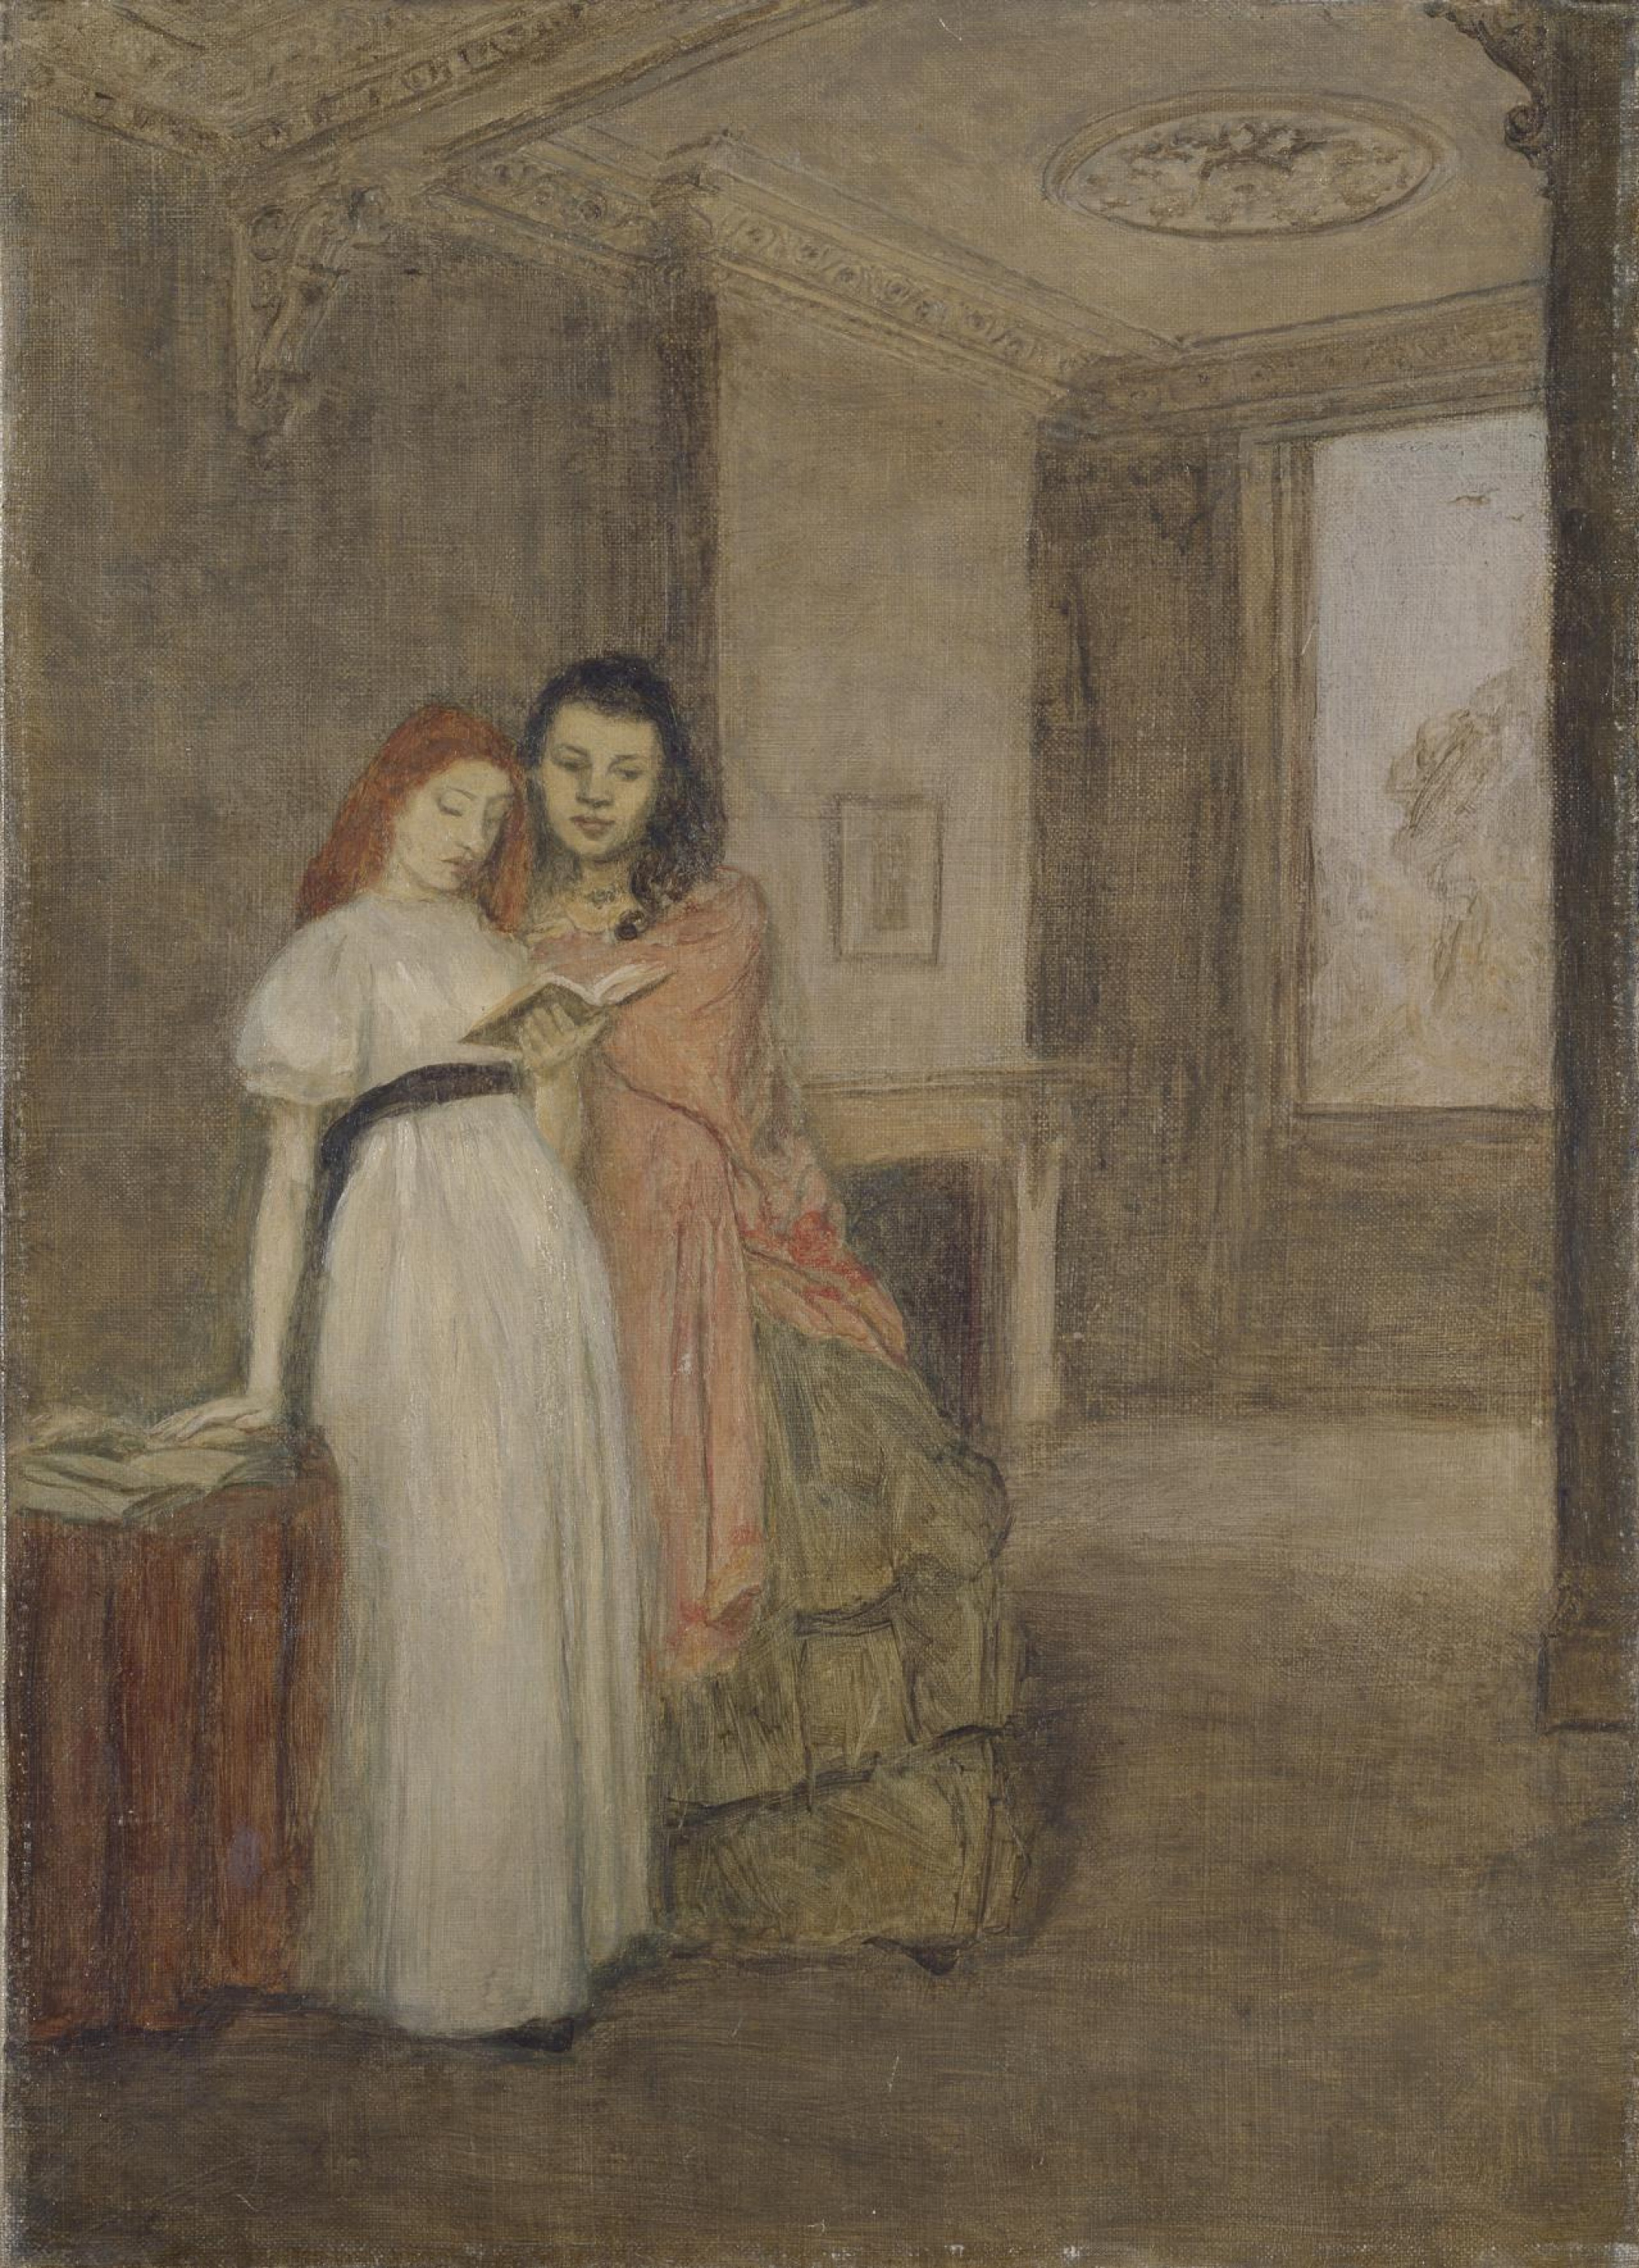 Gwen John, Interior with Figures, 1899, National Gallery of Victoria (NGV), Melbourne, Australia